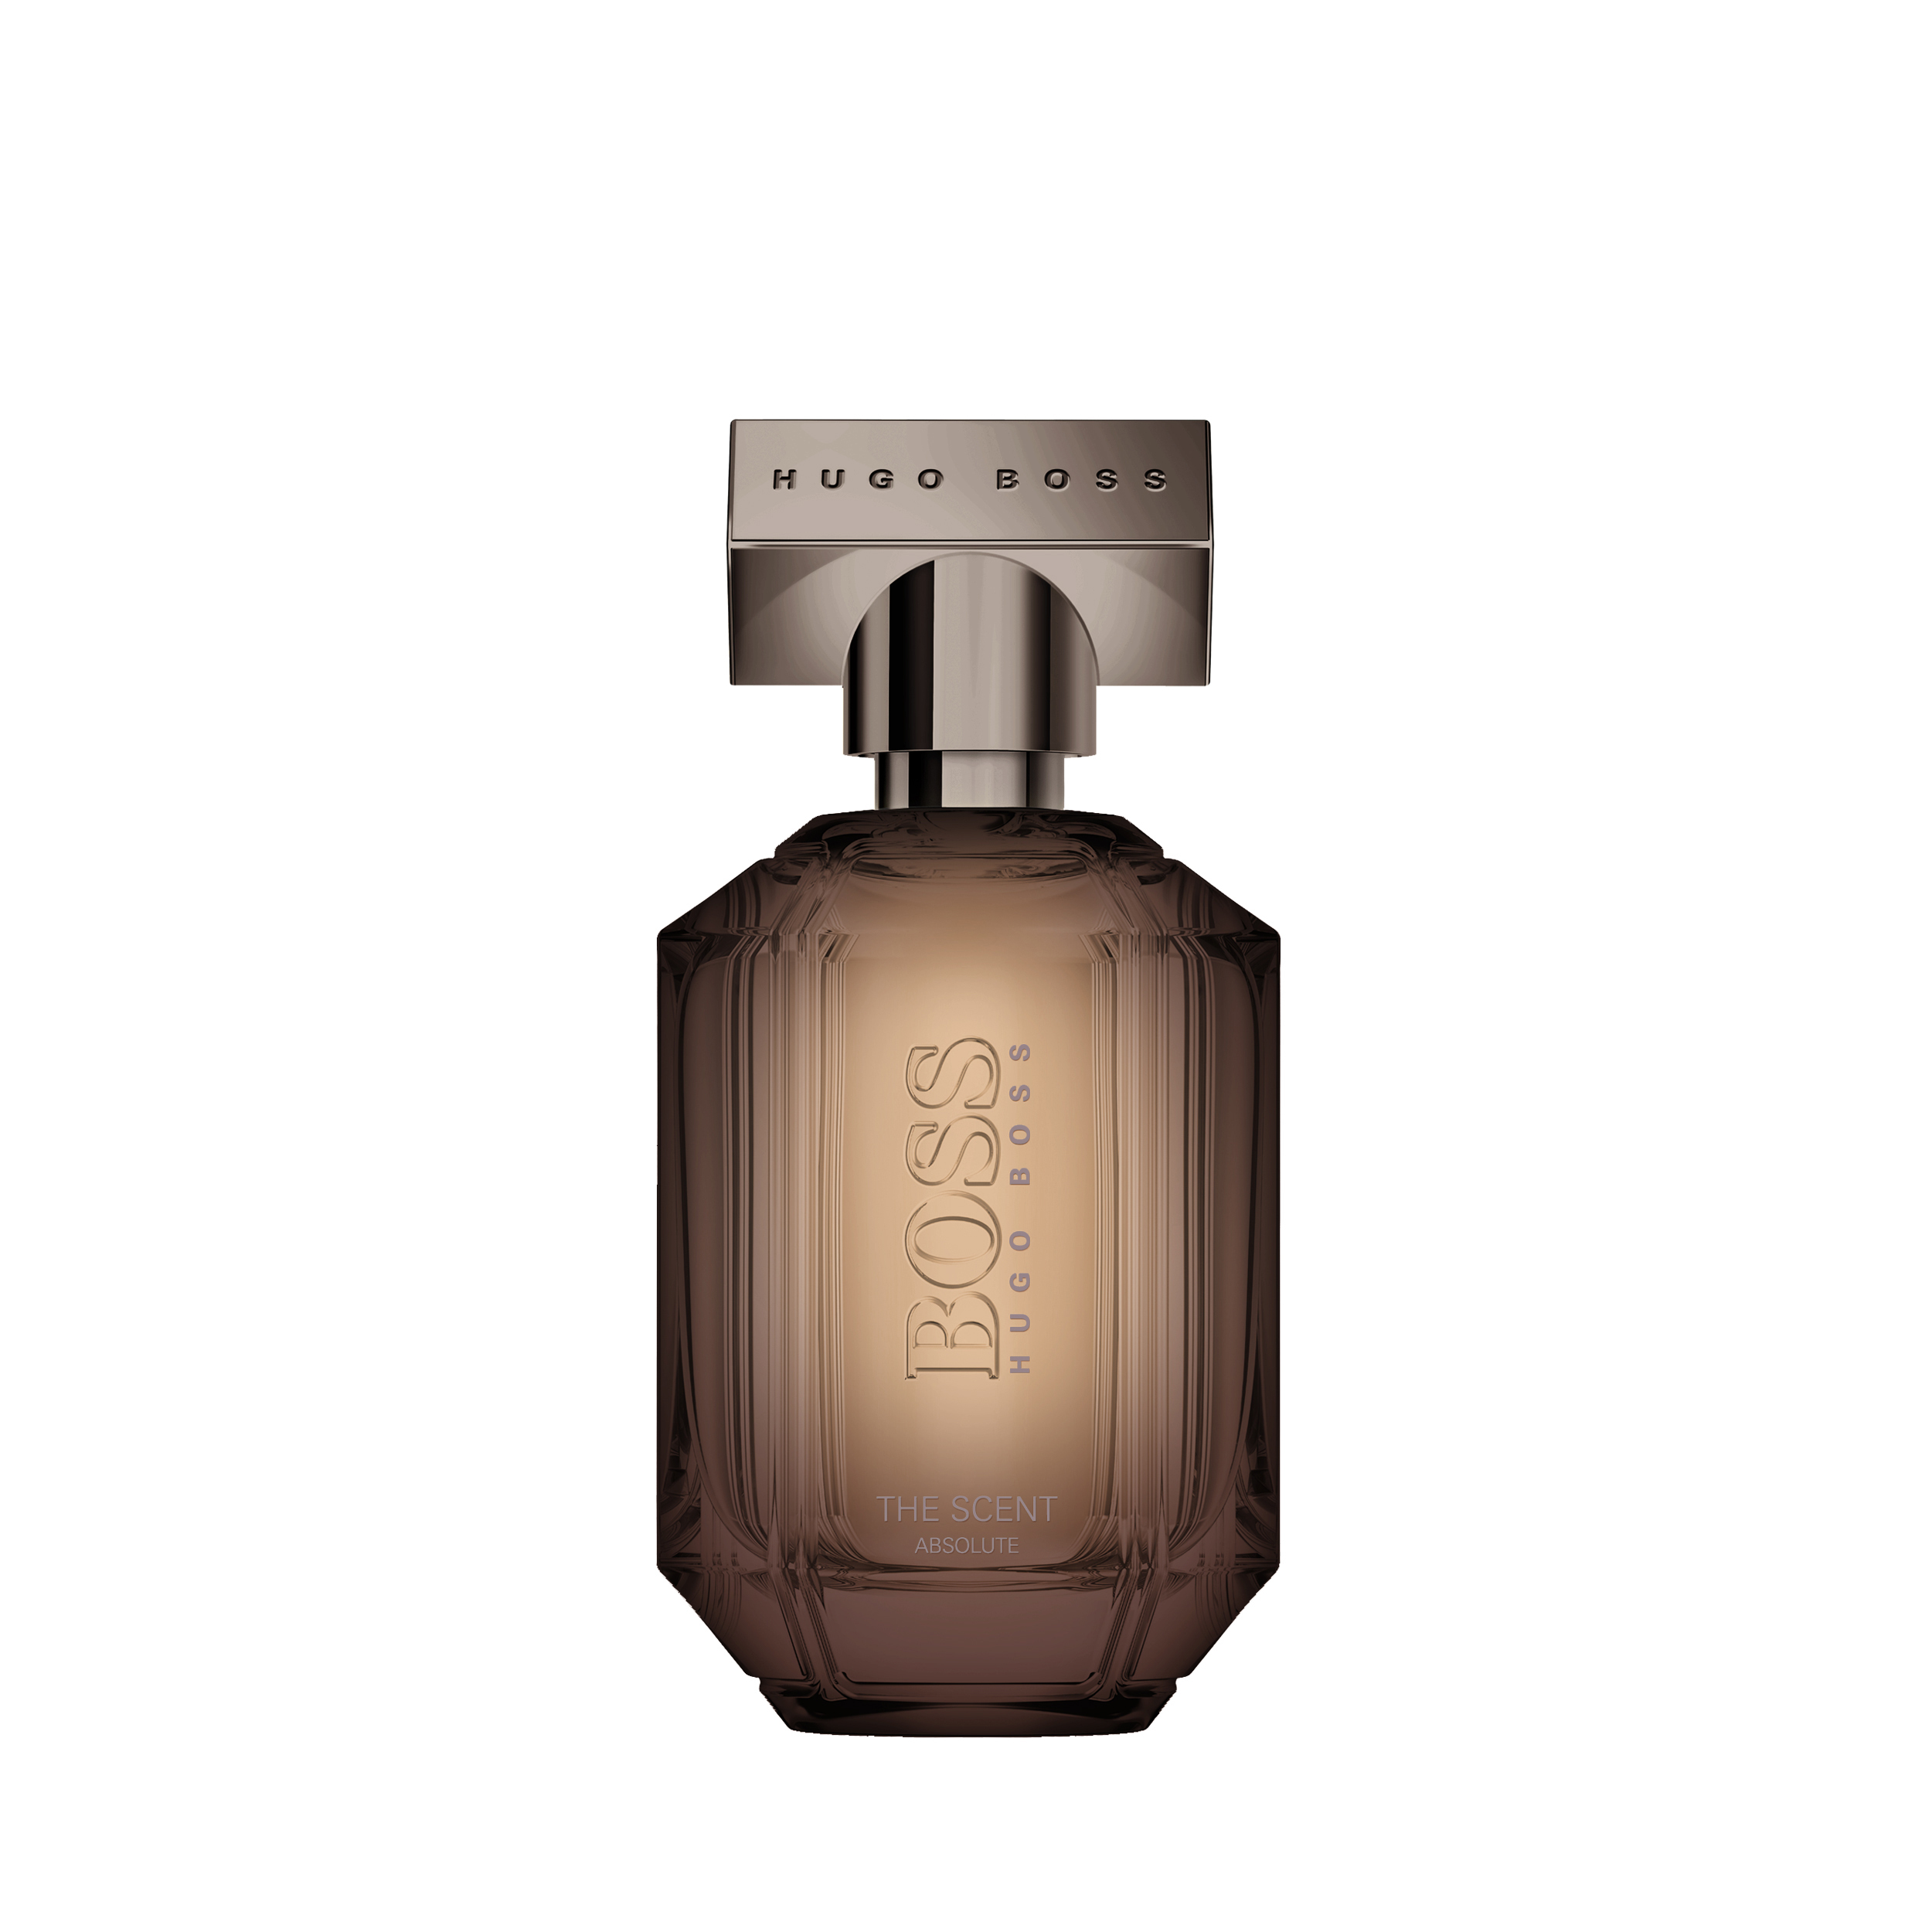 HUGO BOSS BOSS The Scent Absolute For Her